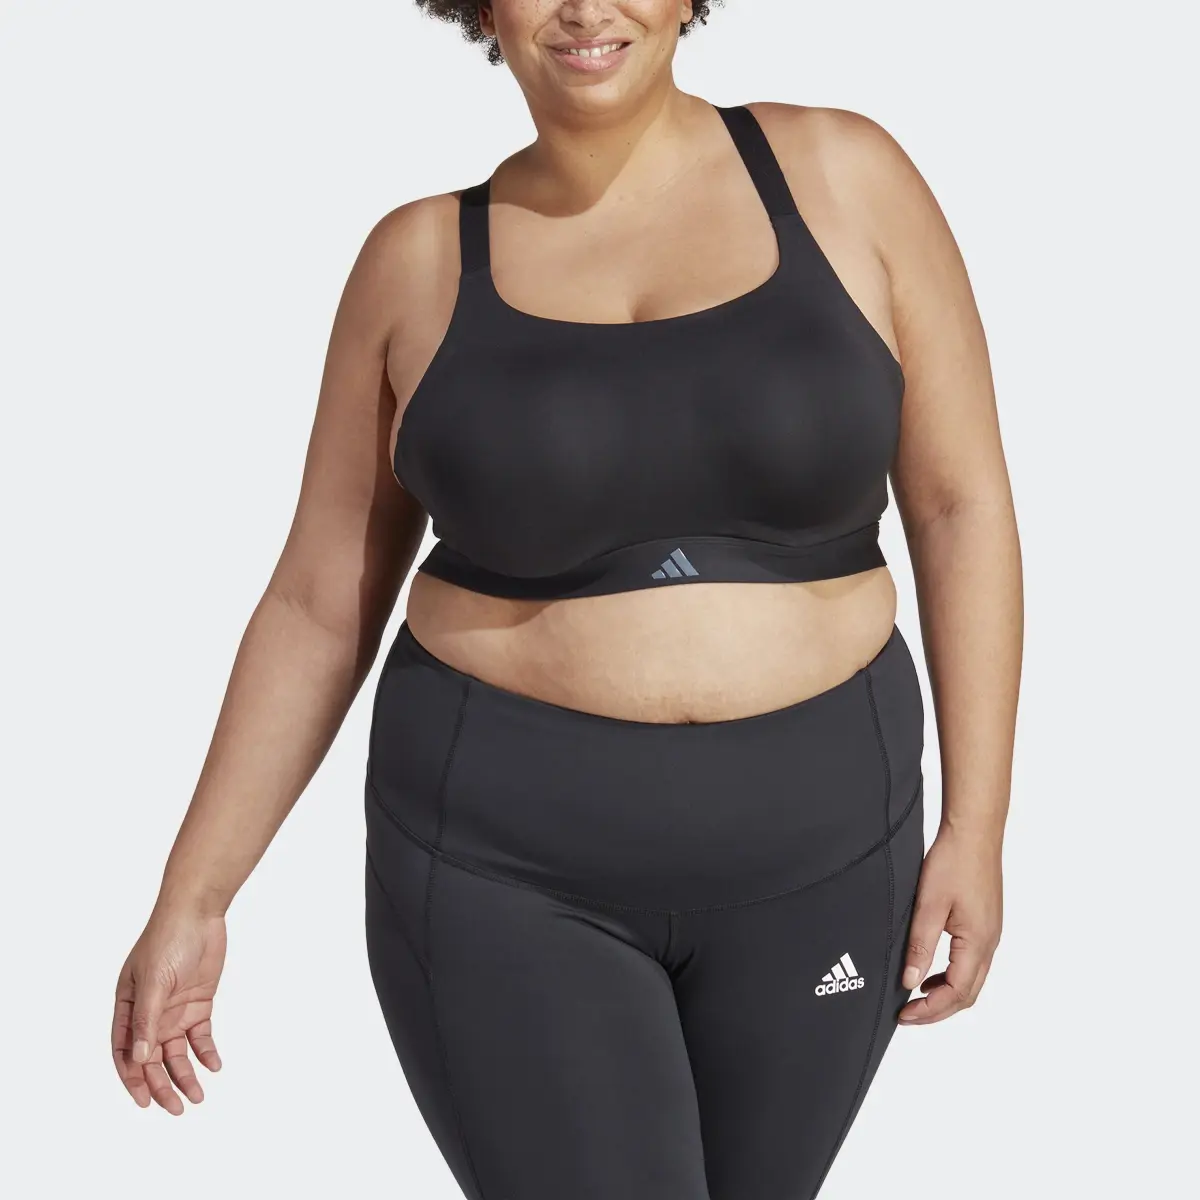 Adidas Brassière de training Tailored Impact Luxe Training Maintien fort (Grandes tailles). 1